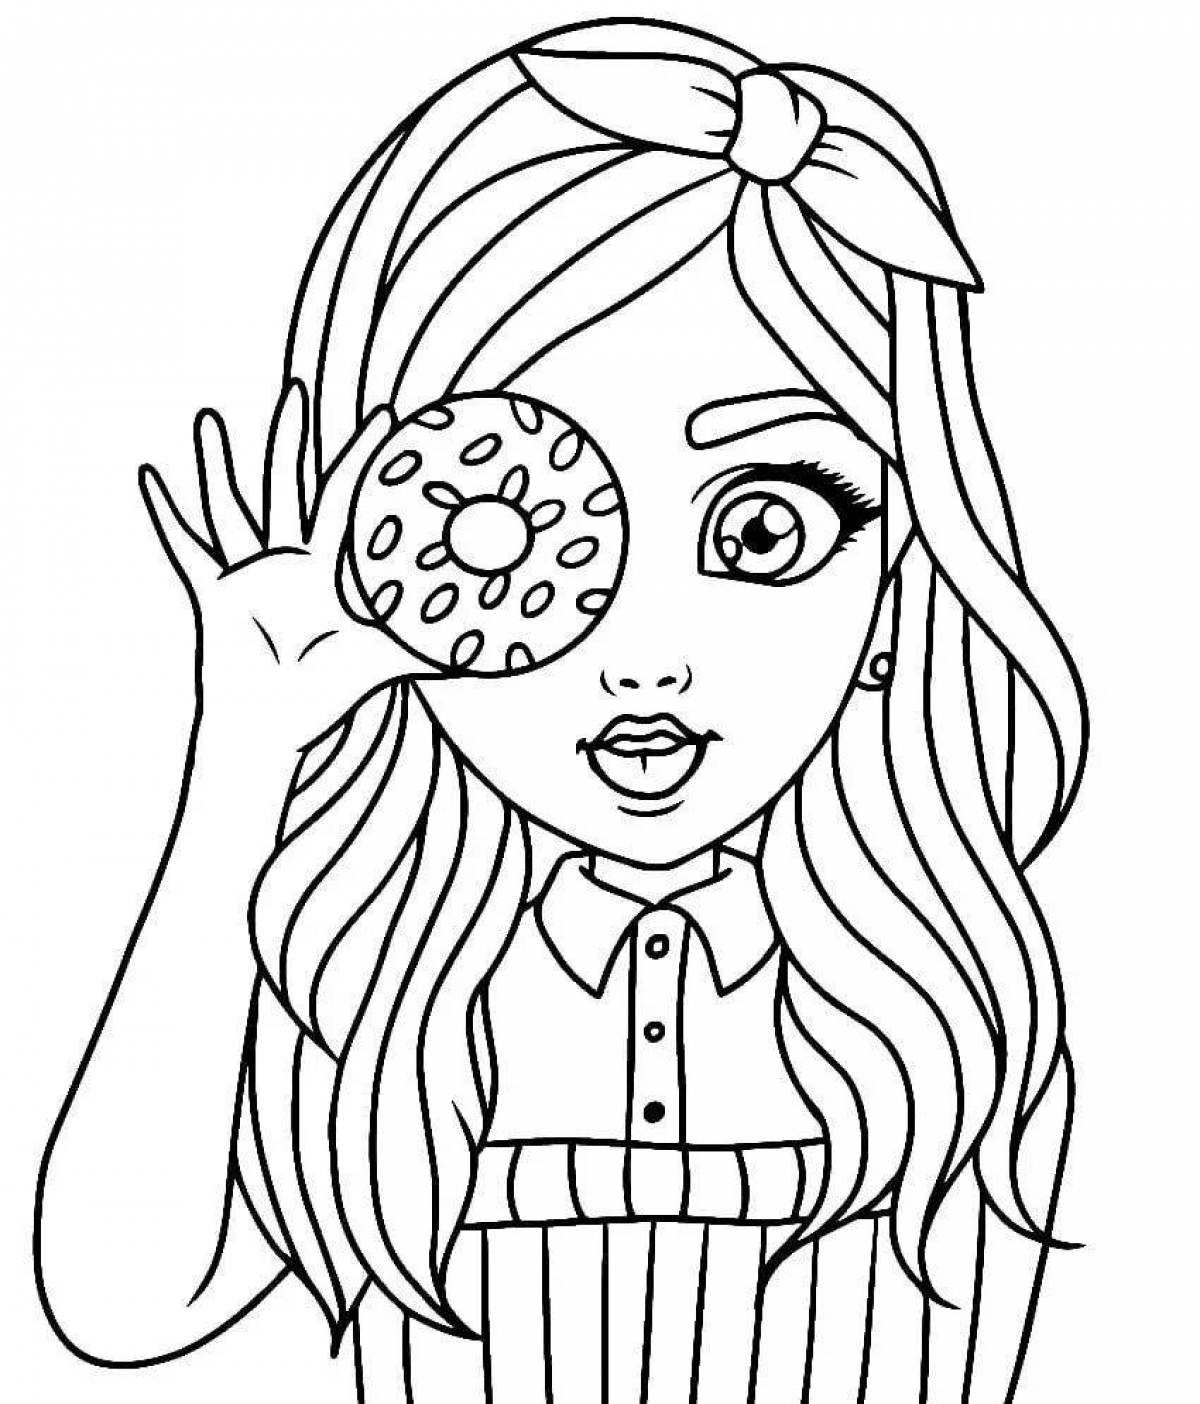 Fairytale coloring book for girls 7-8 years old